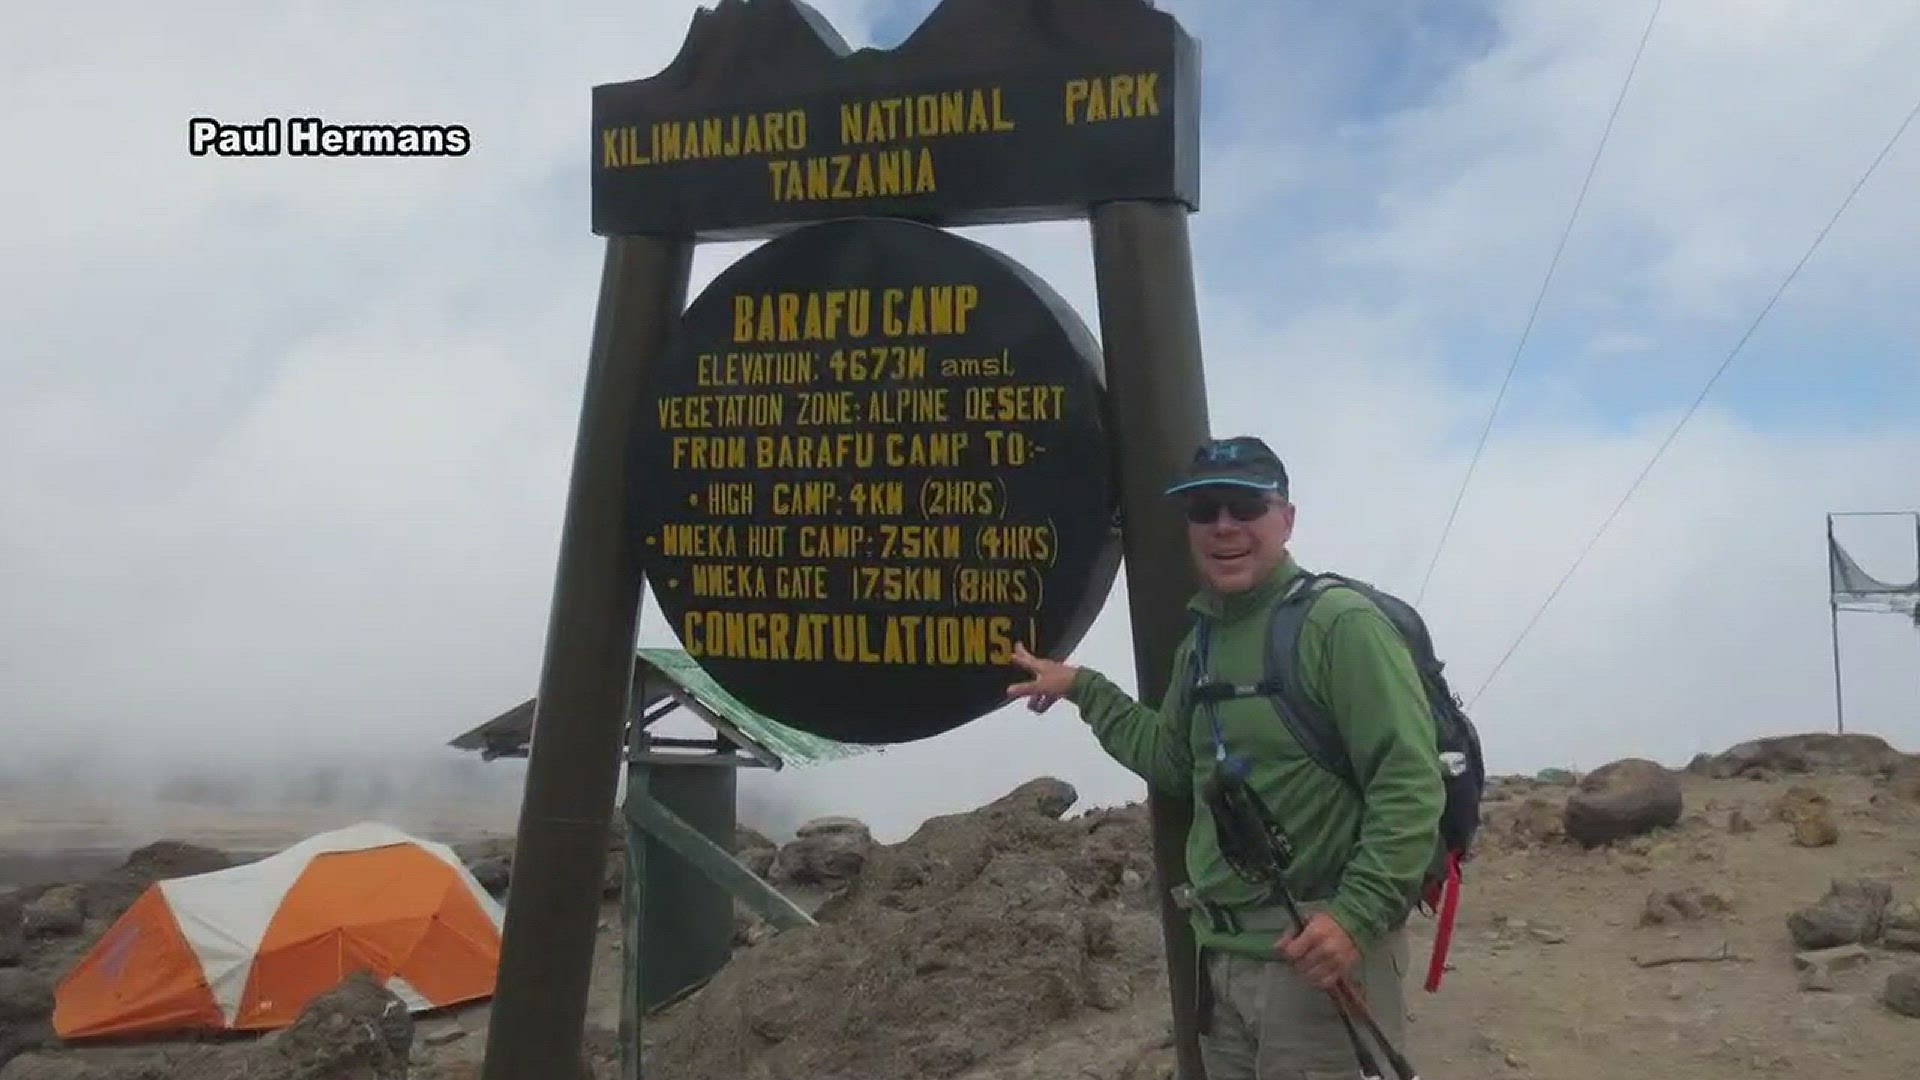 Paul Hermans climbed Africa's tallest mountain, Mt. Kilimanjaro to pay tribute to fallen police officers.